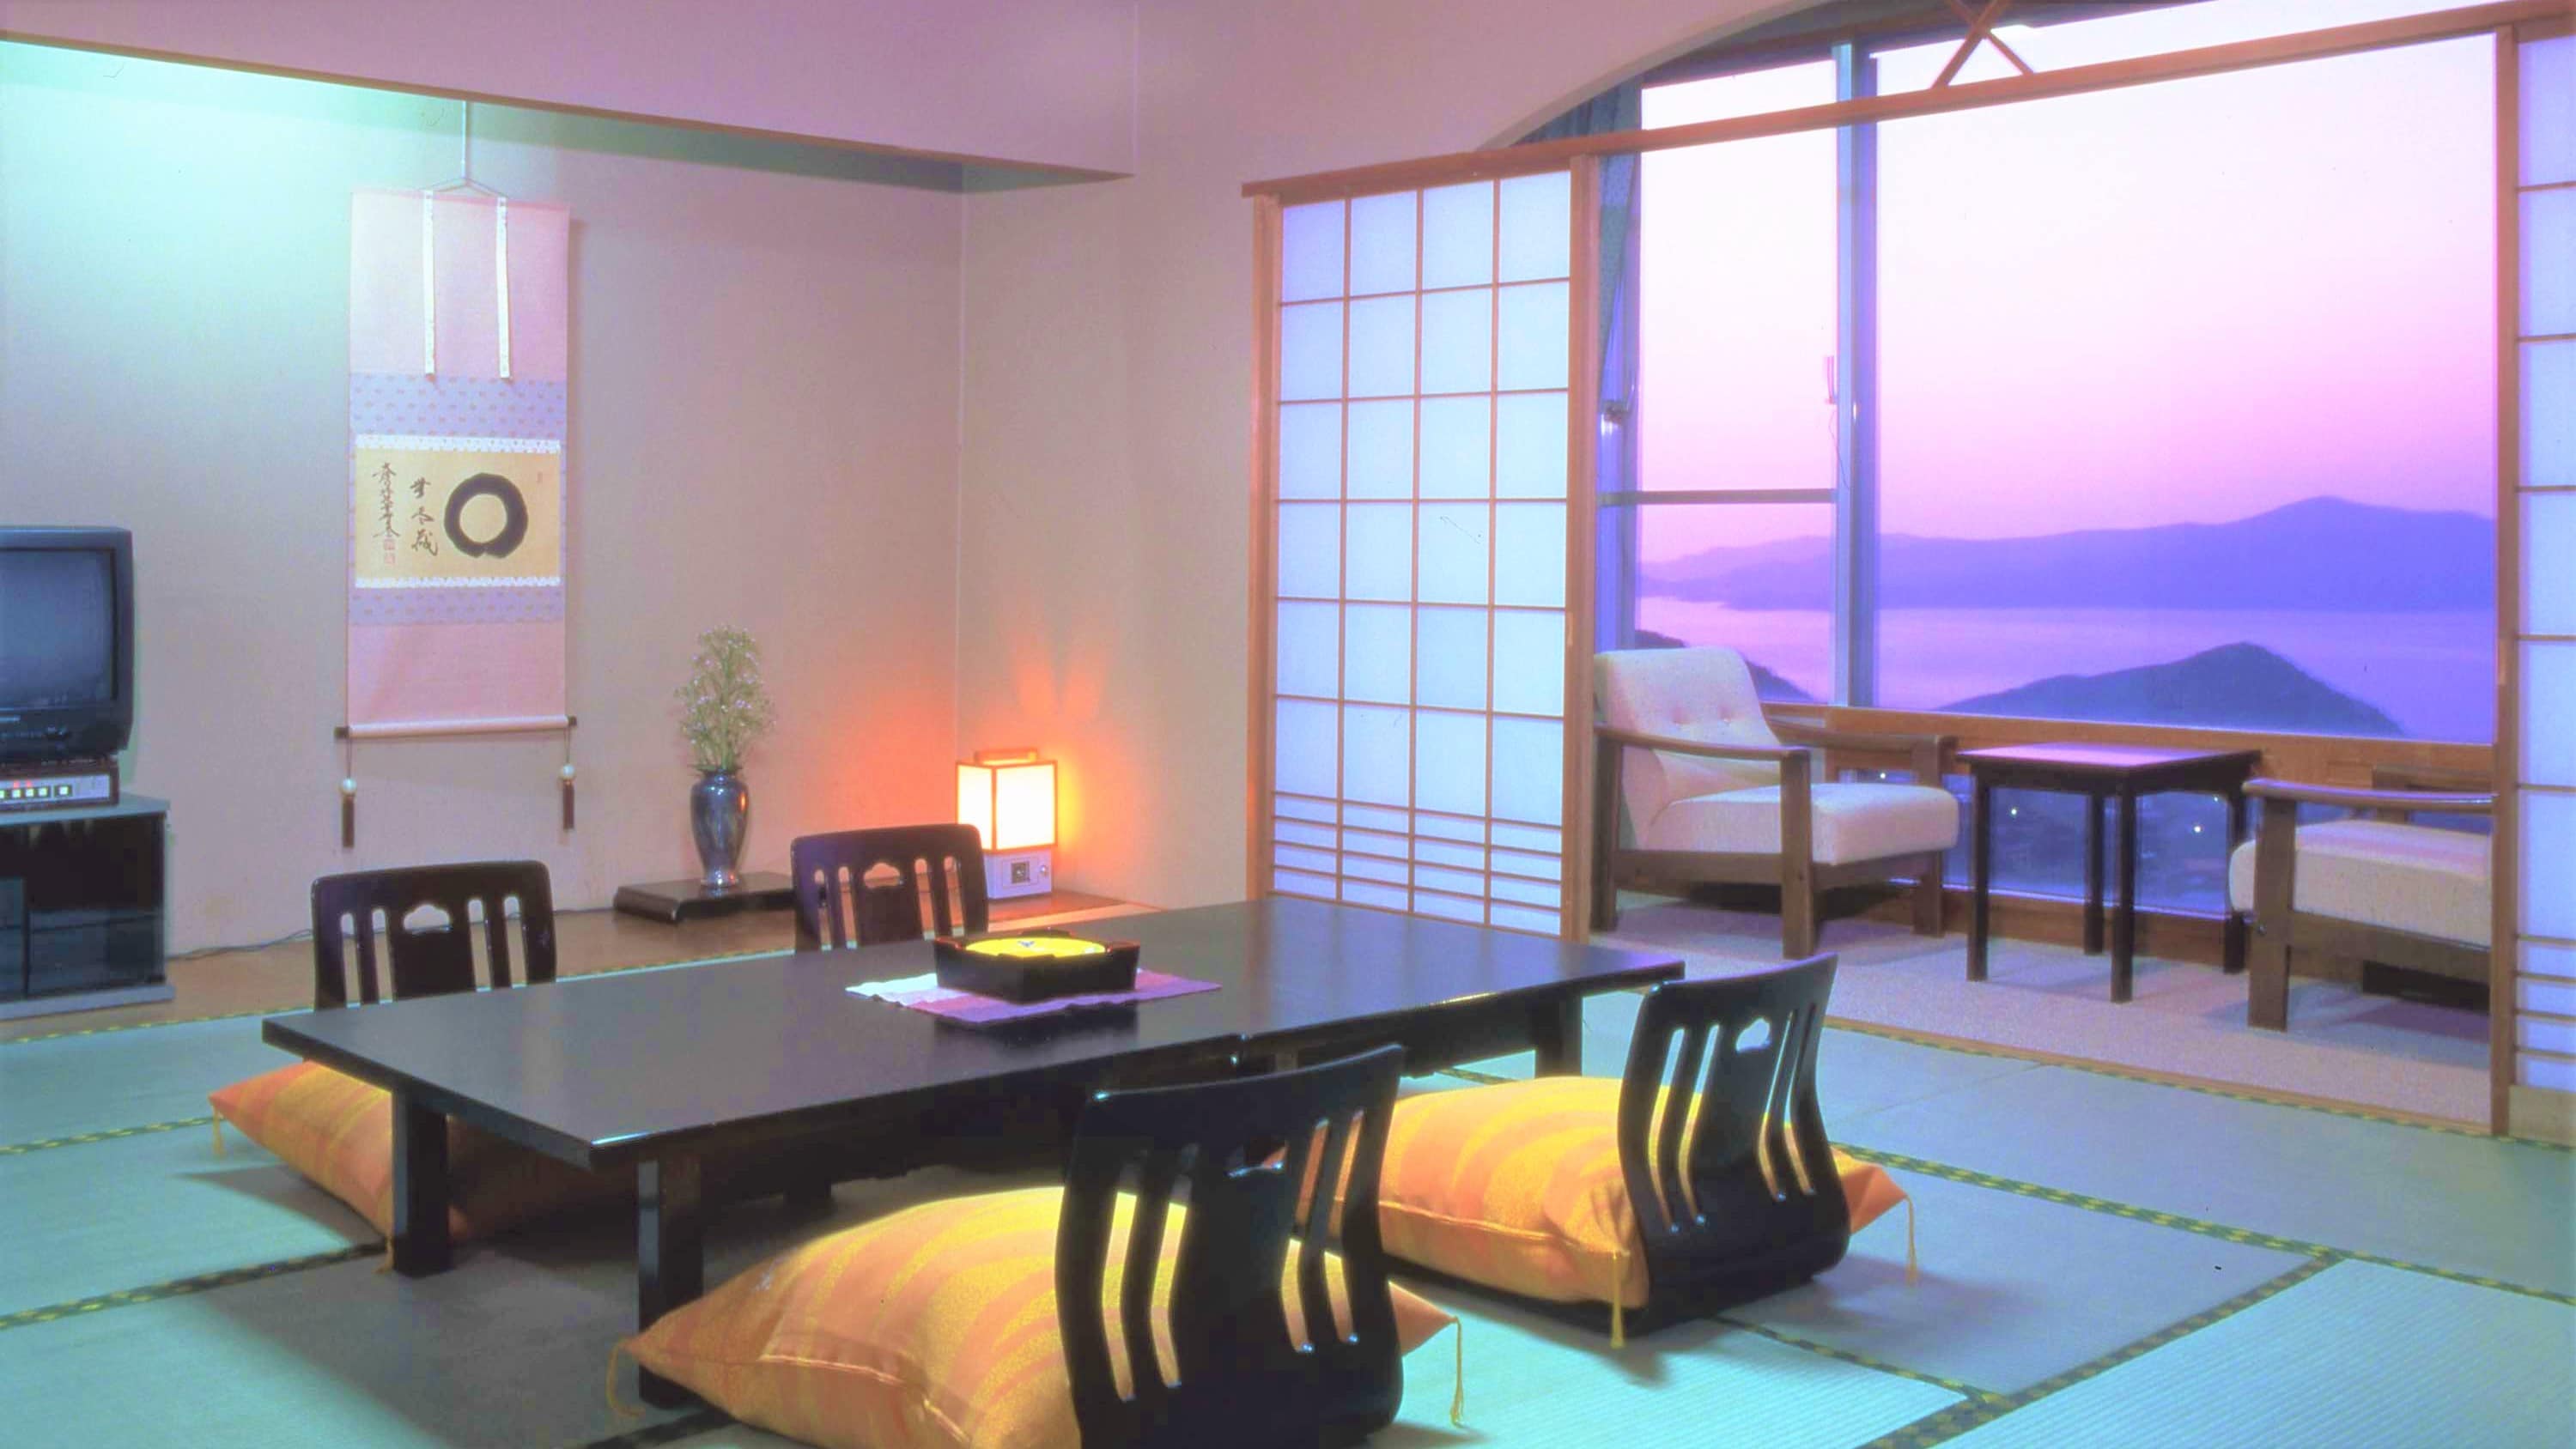 [East Building] Japanese-style room on the sea side